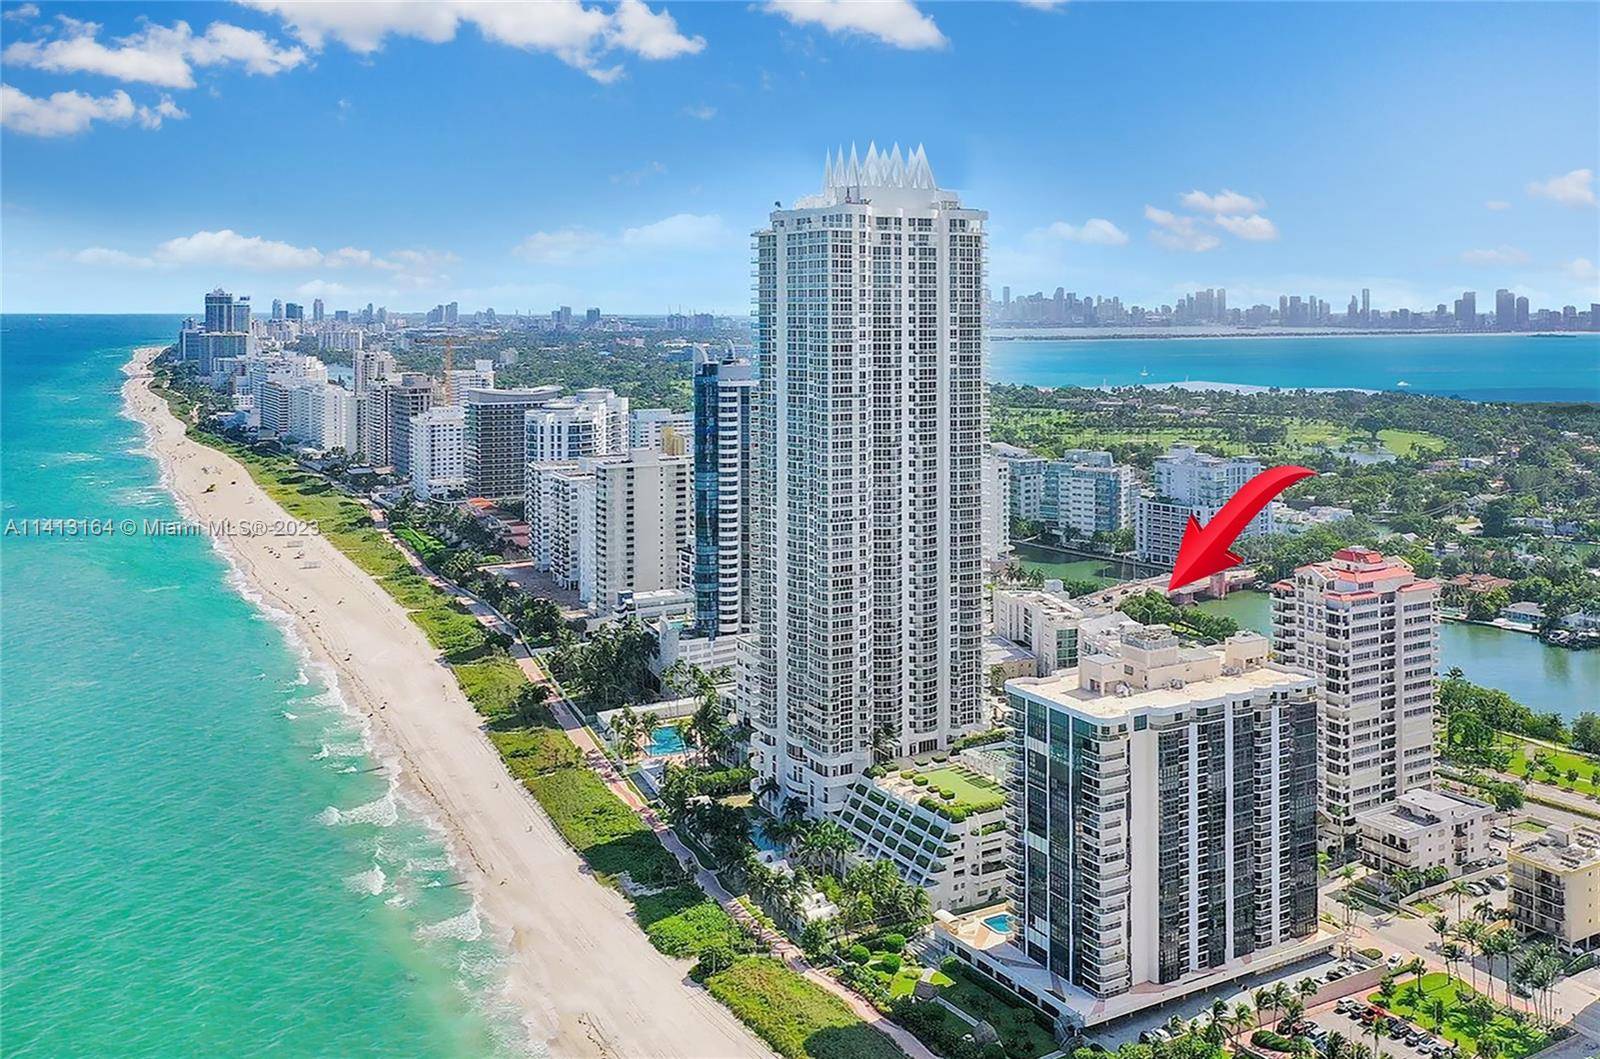 Immerse yourself in the vibrant Miami Beach lifestyle with this stunning 2 bedroom condo.